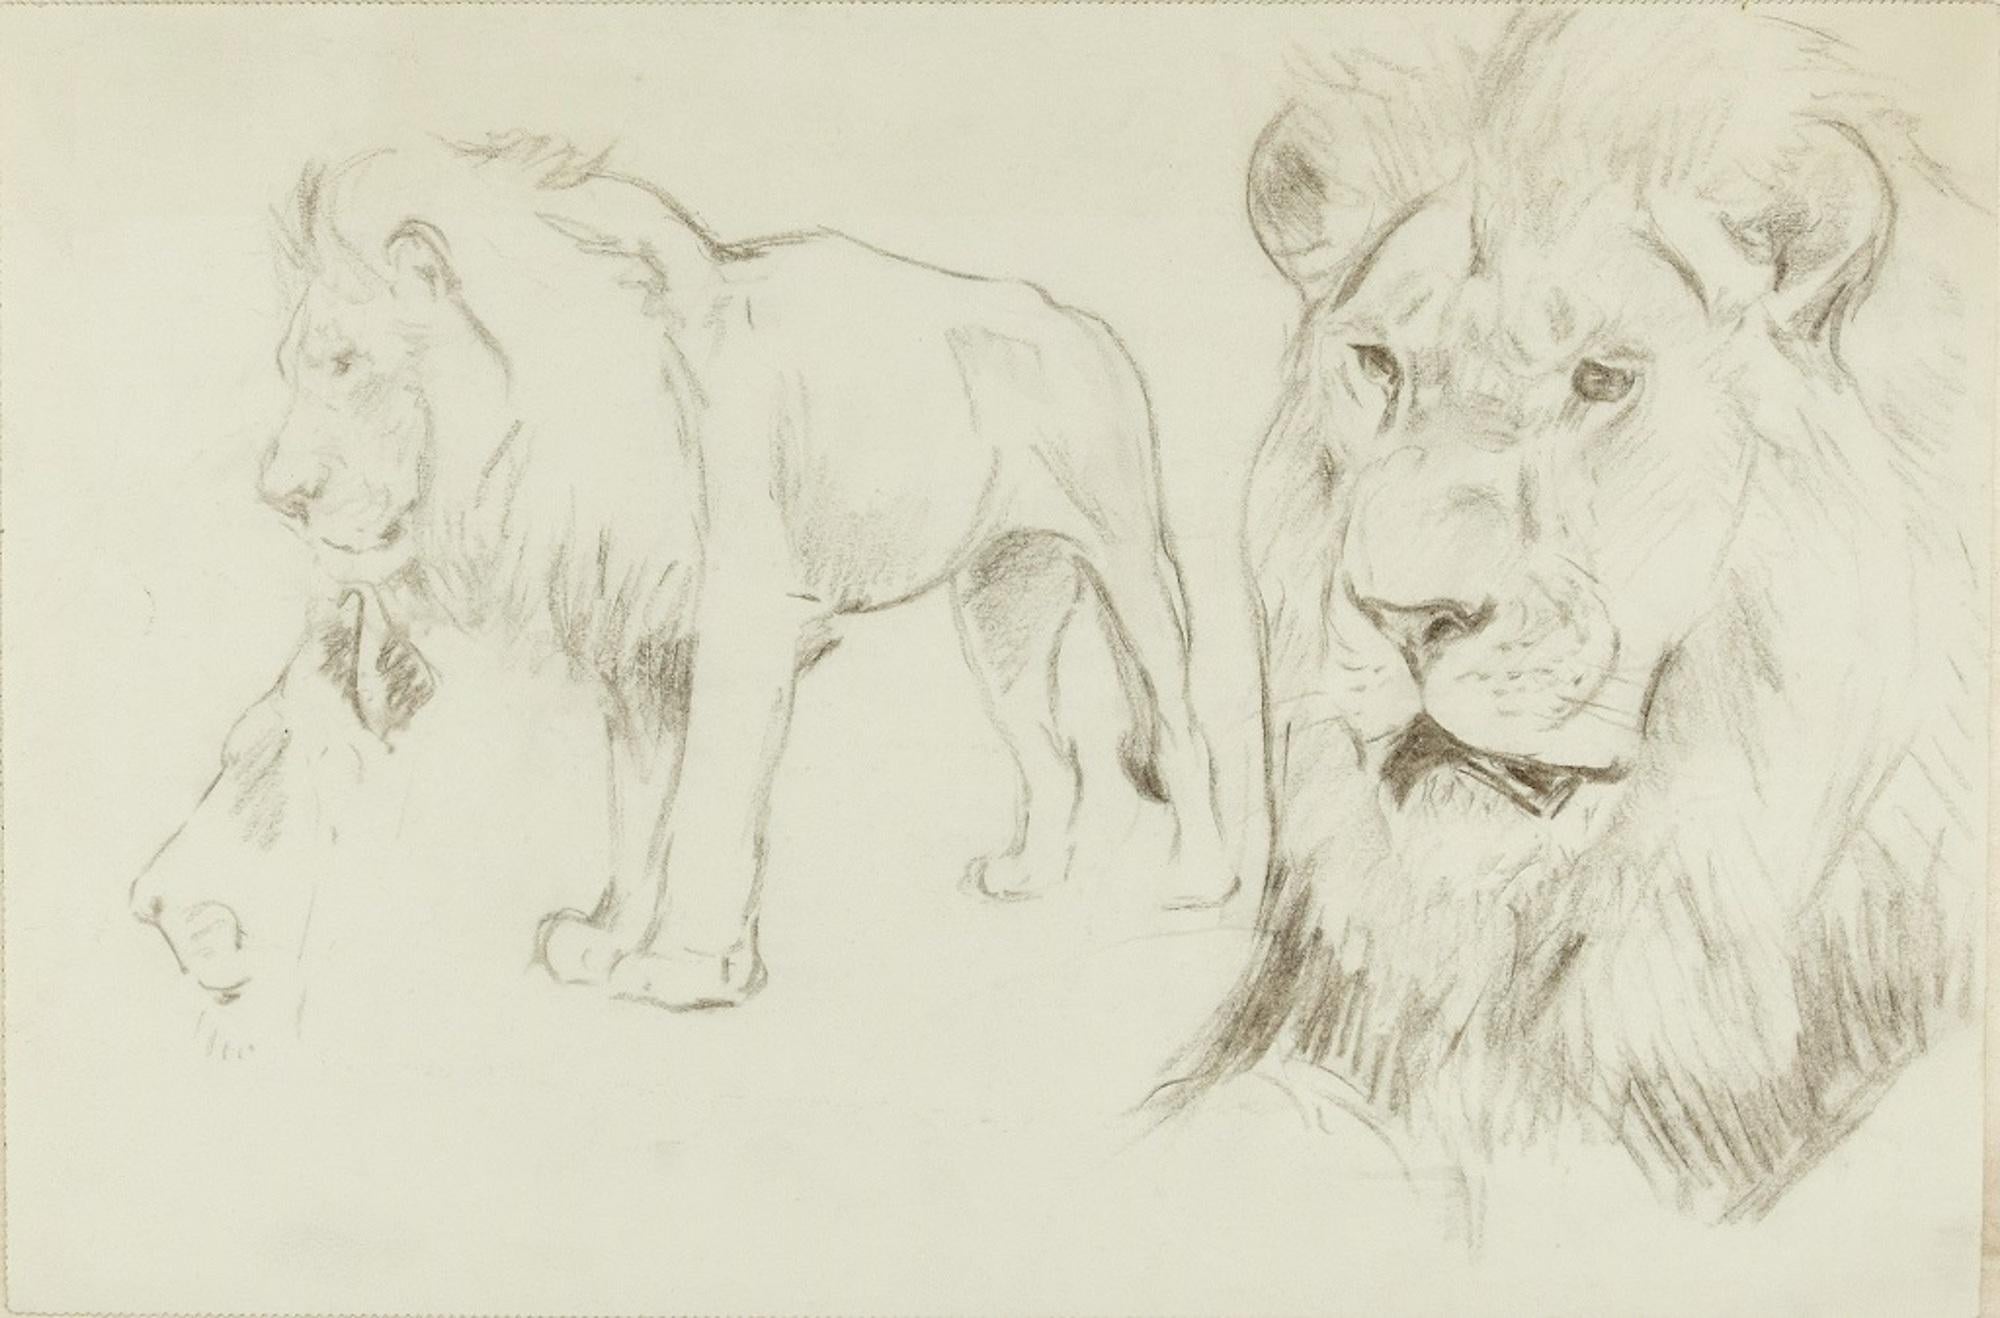 Wilhelm Lorenz Figurative Art - Foreground of a Lion - Original Pencil Drawing by Willy Lorenz - 1940s